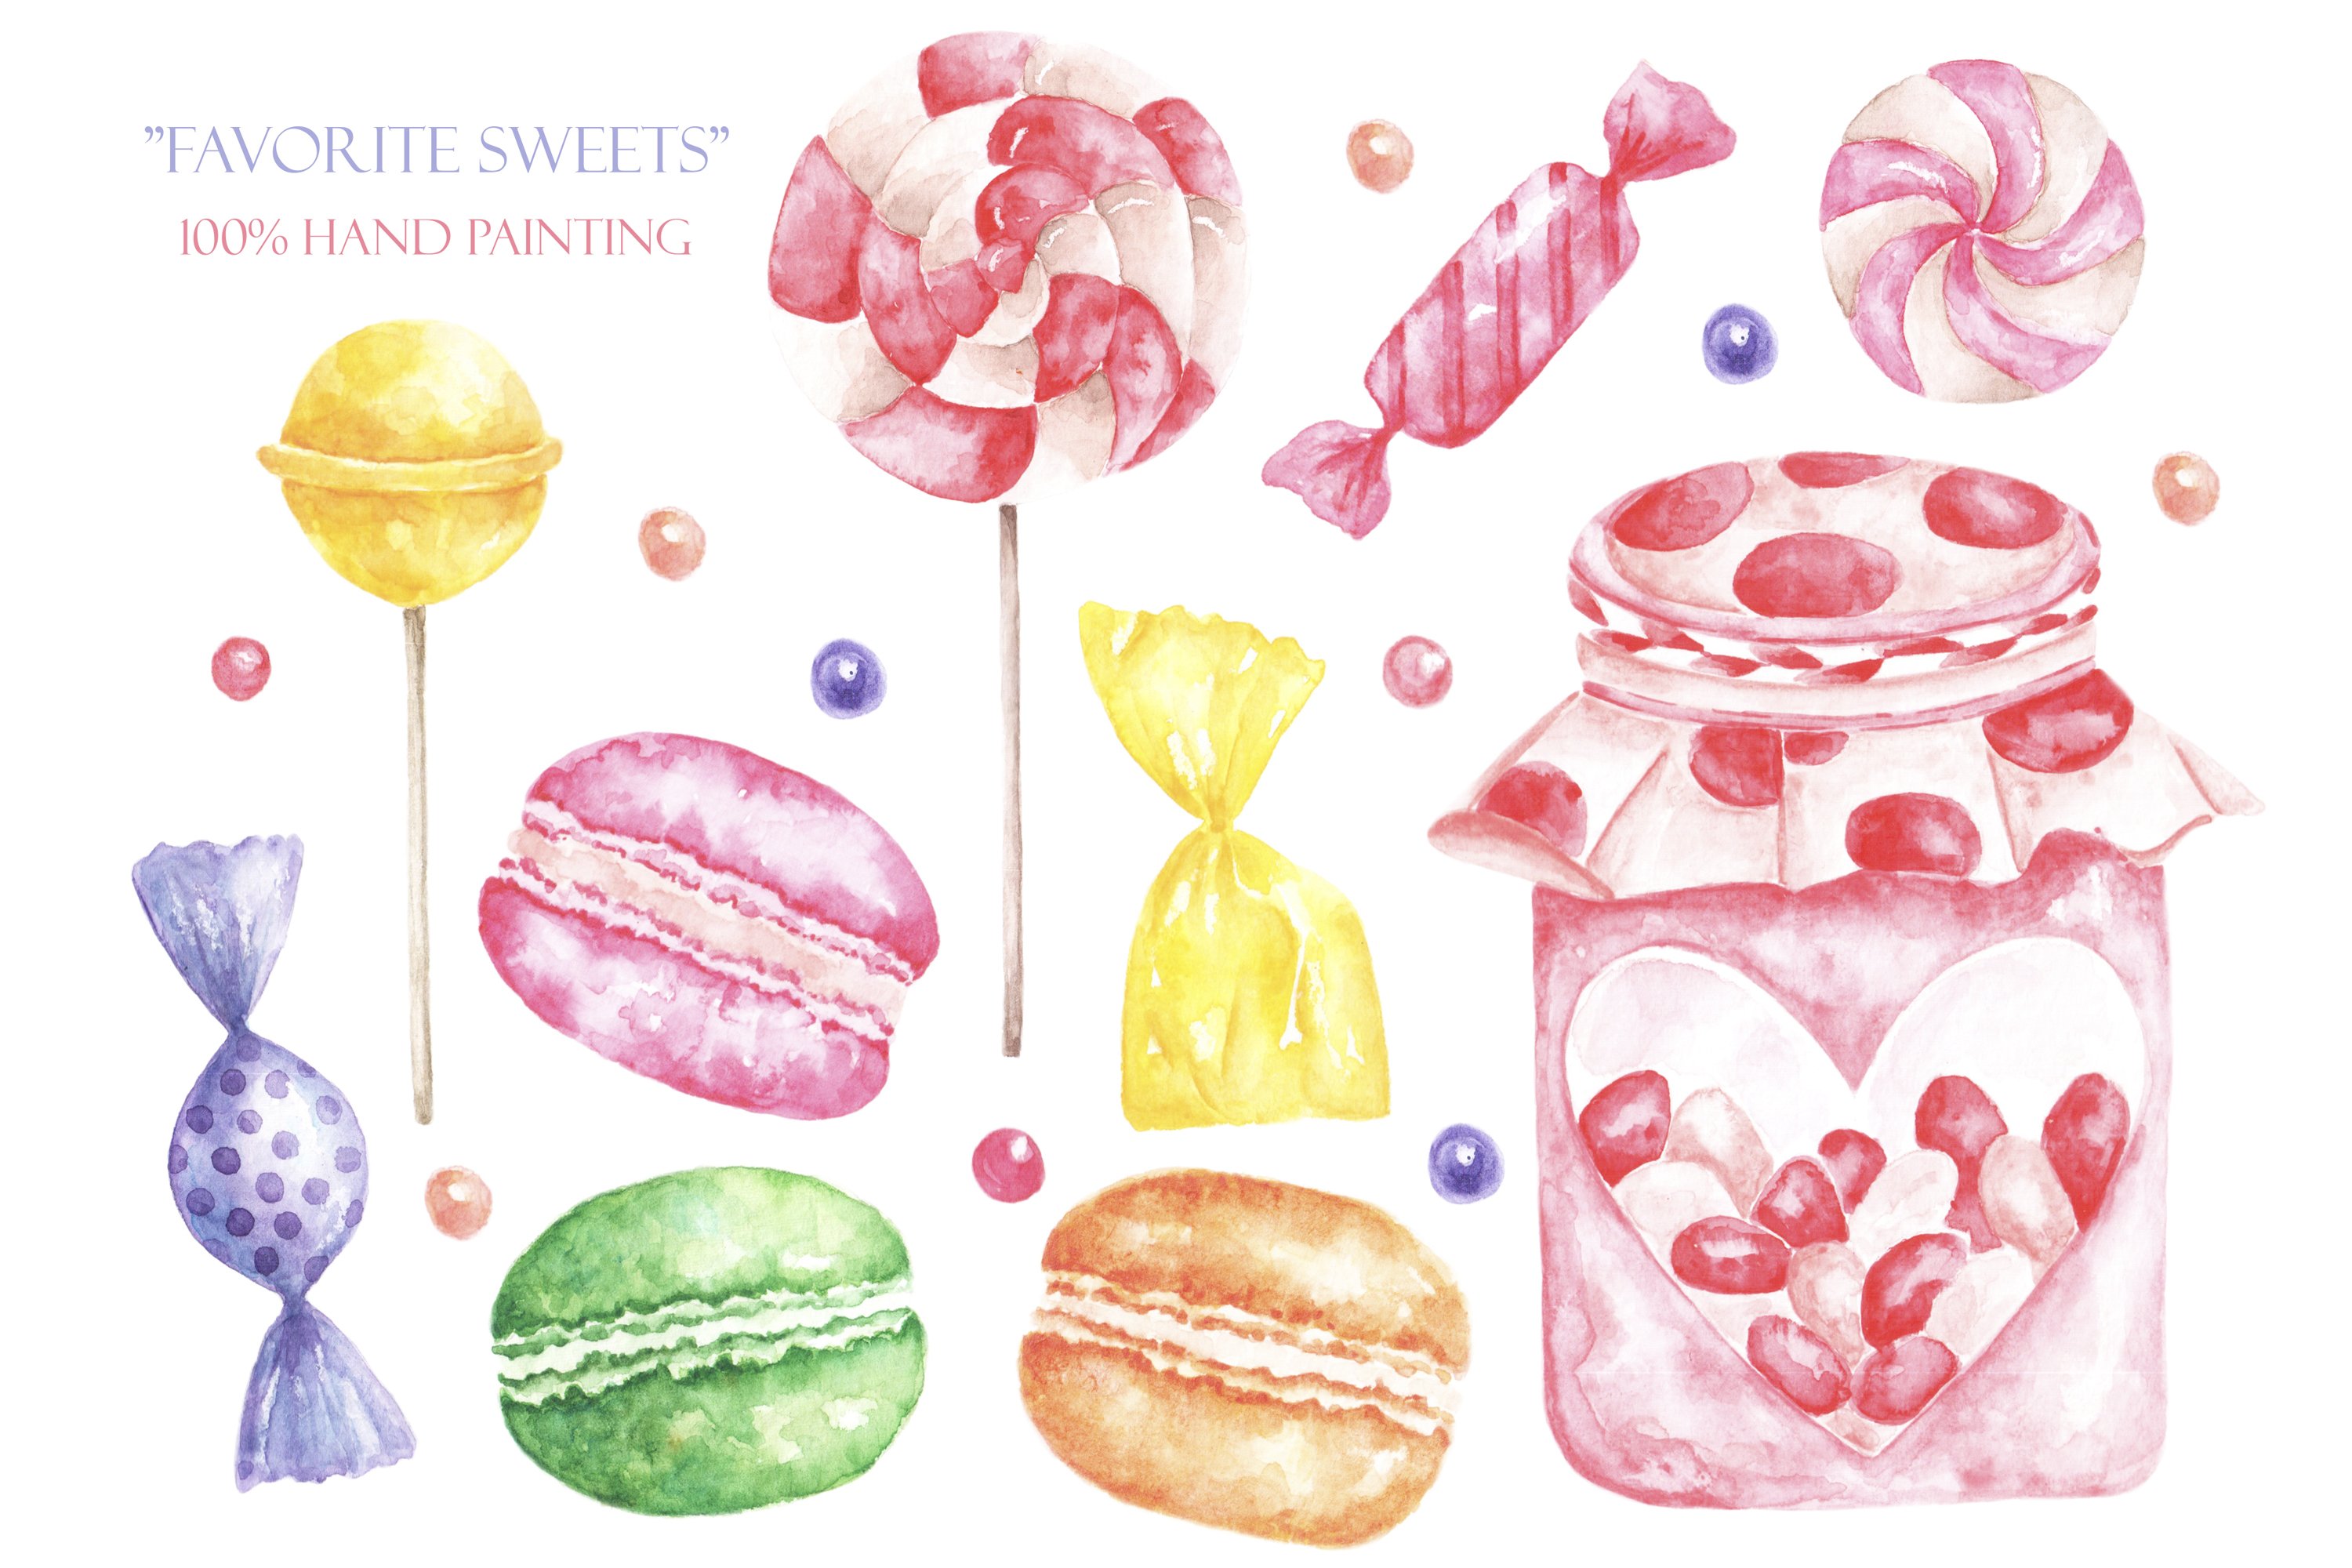 Some sweets for your collection.